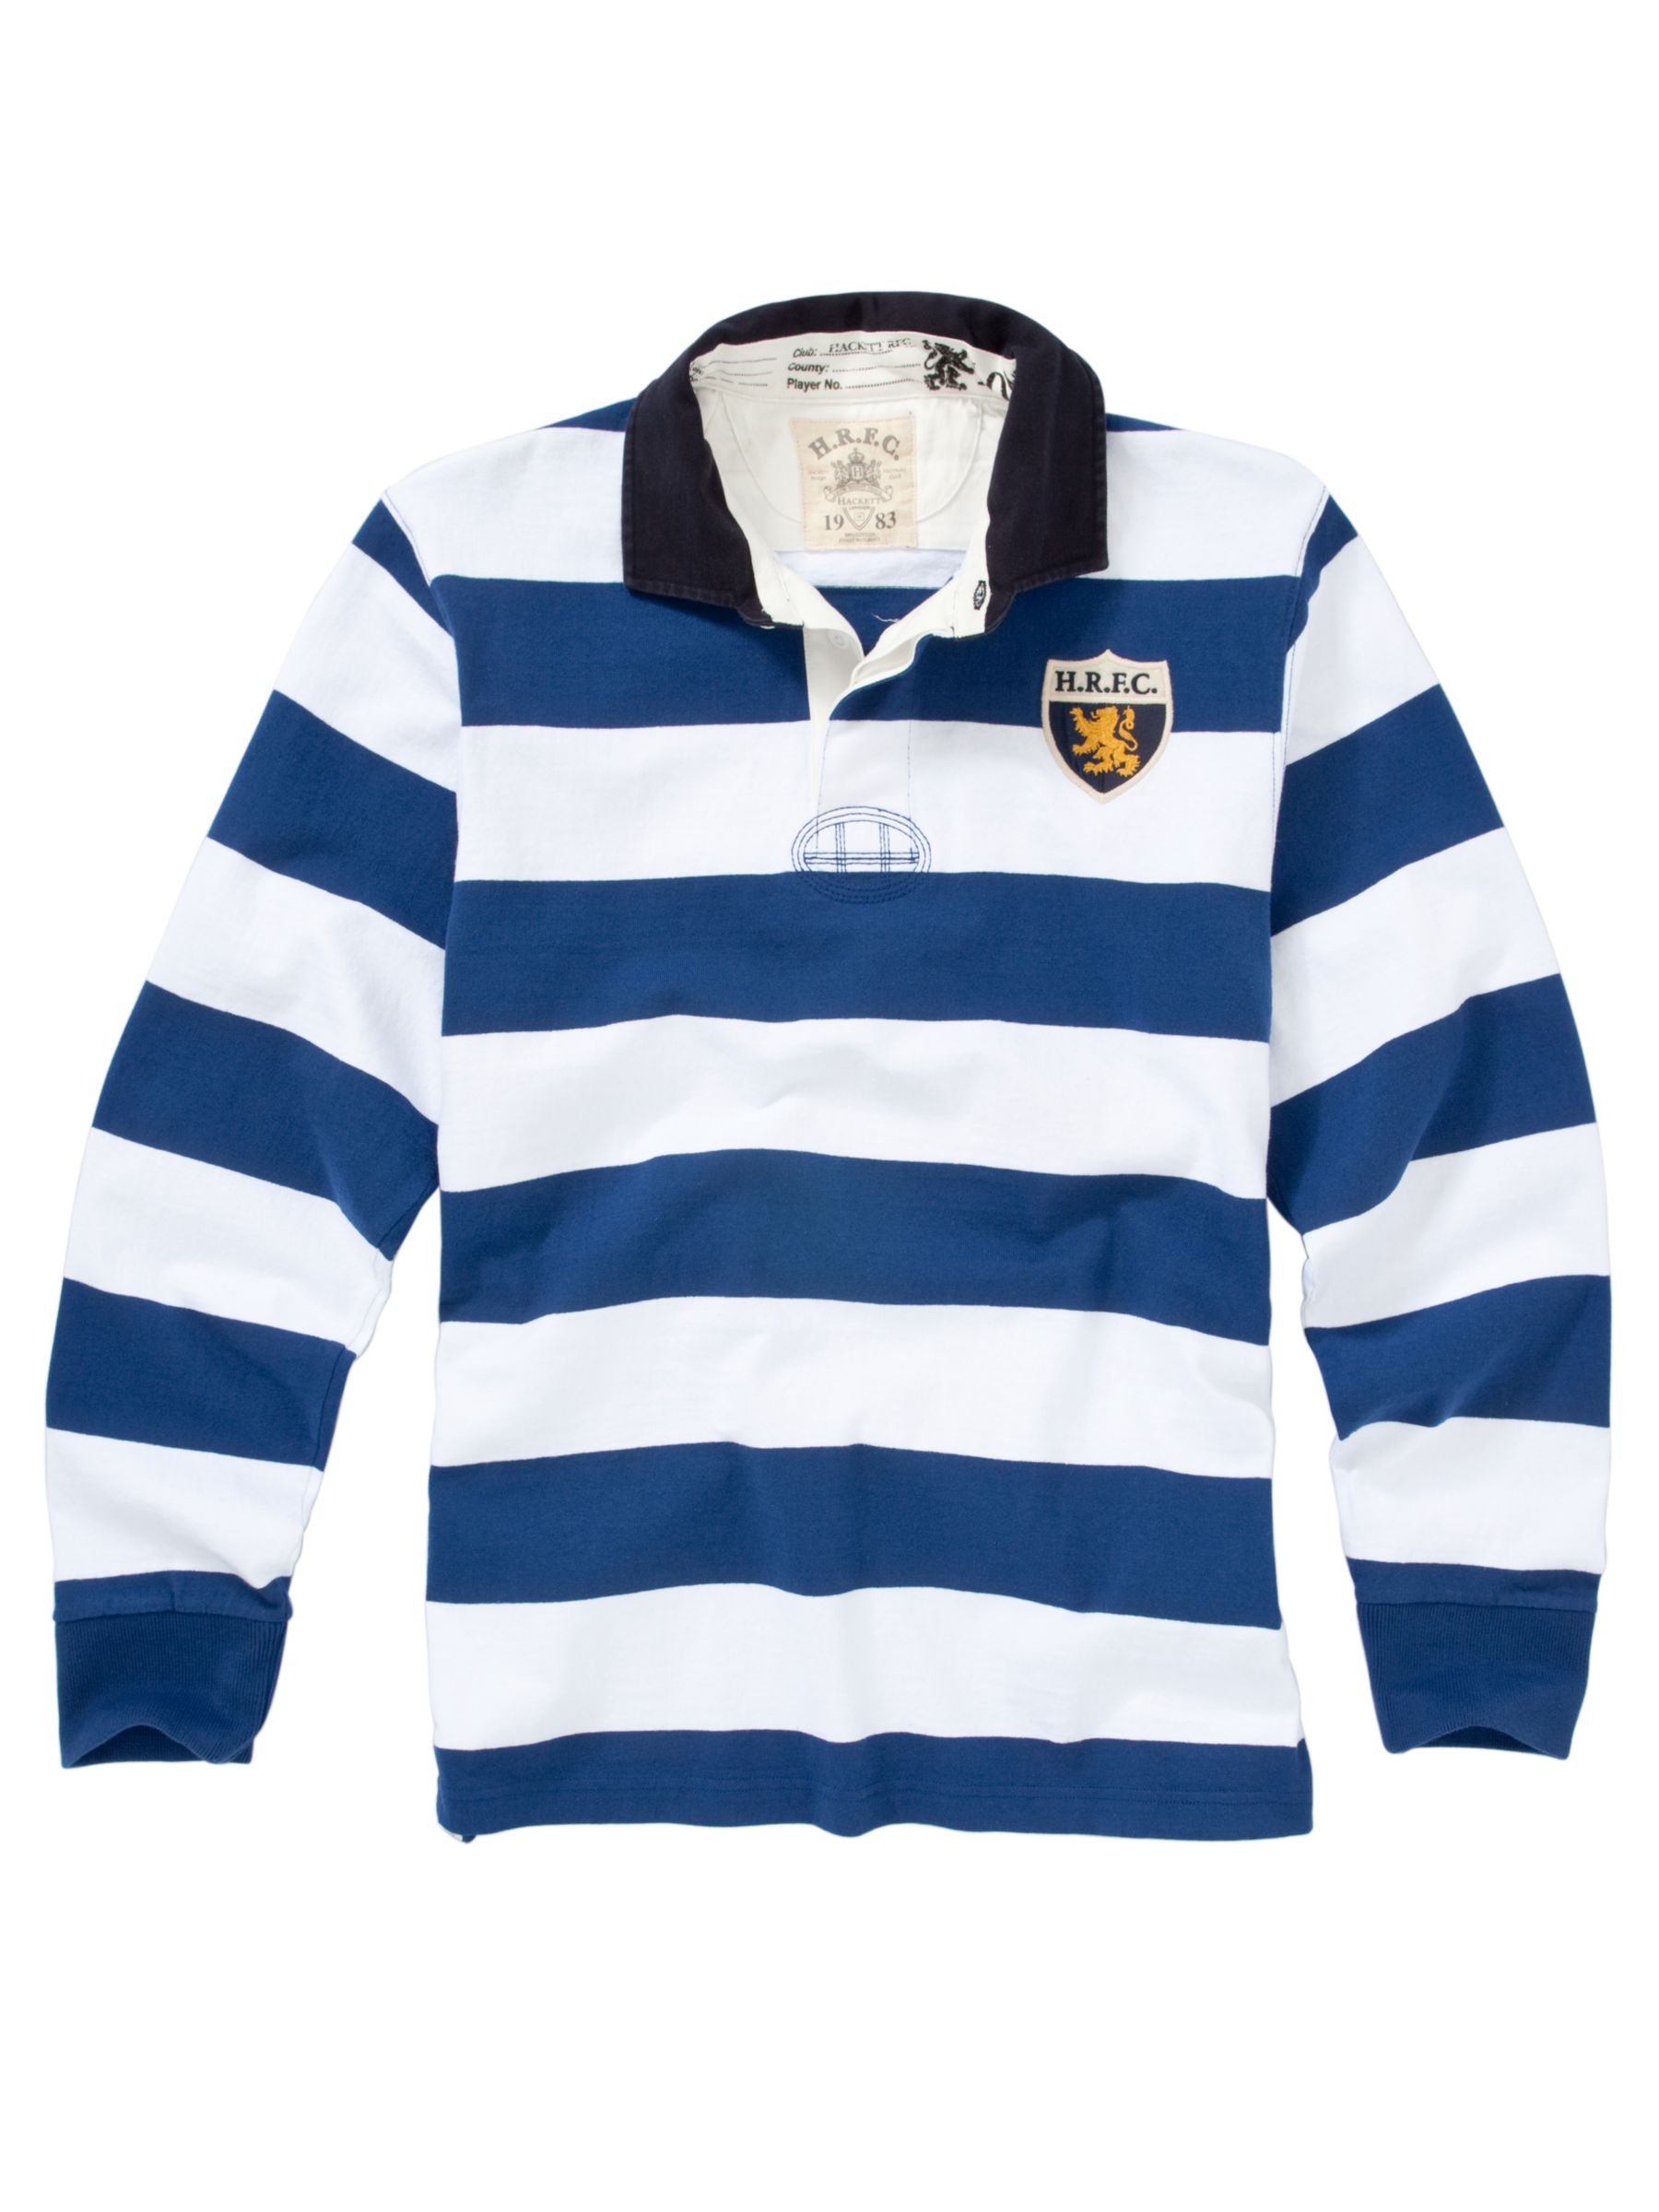 Hackett London Vintage Patch Rugby Shirt,